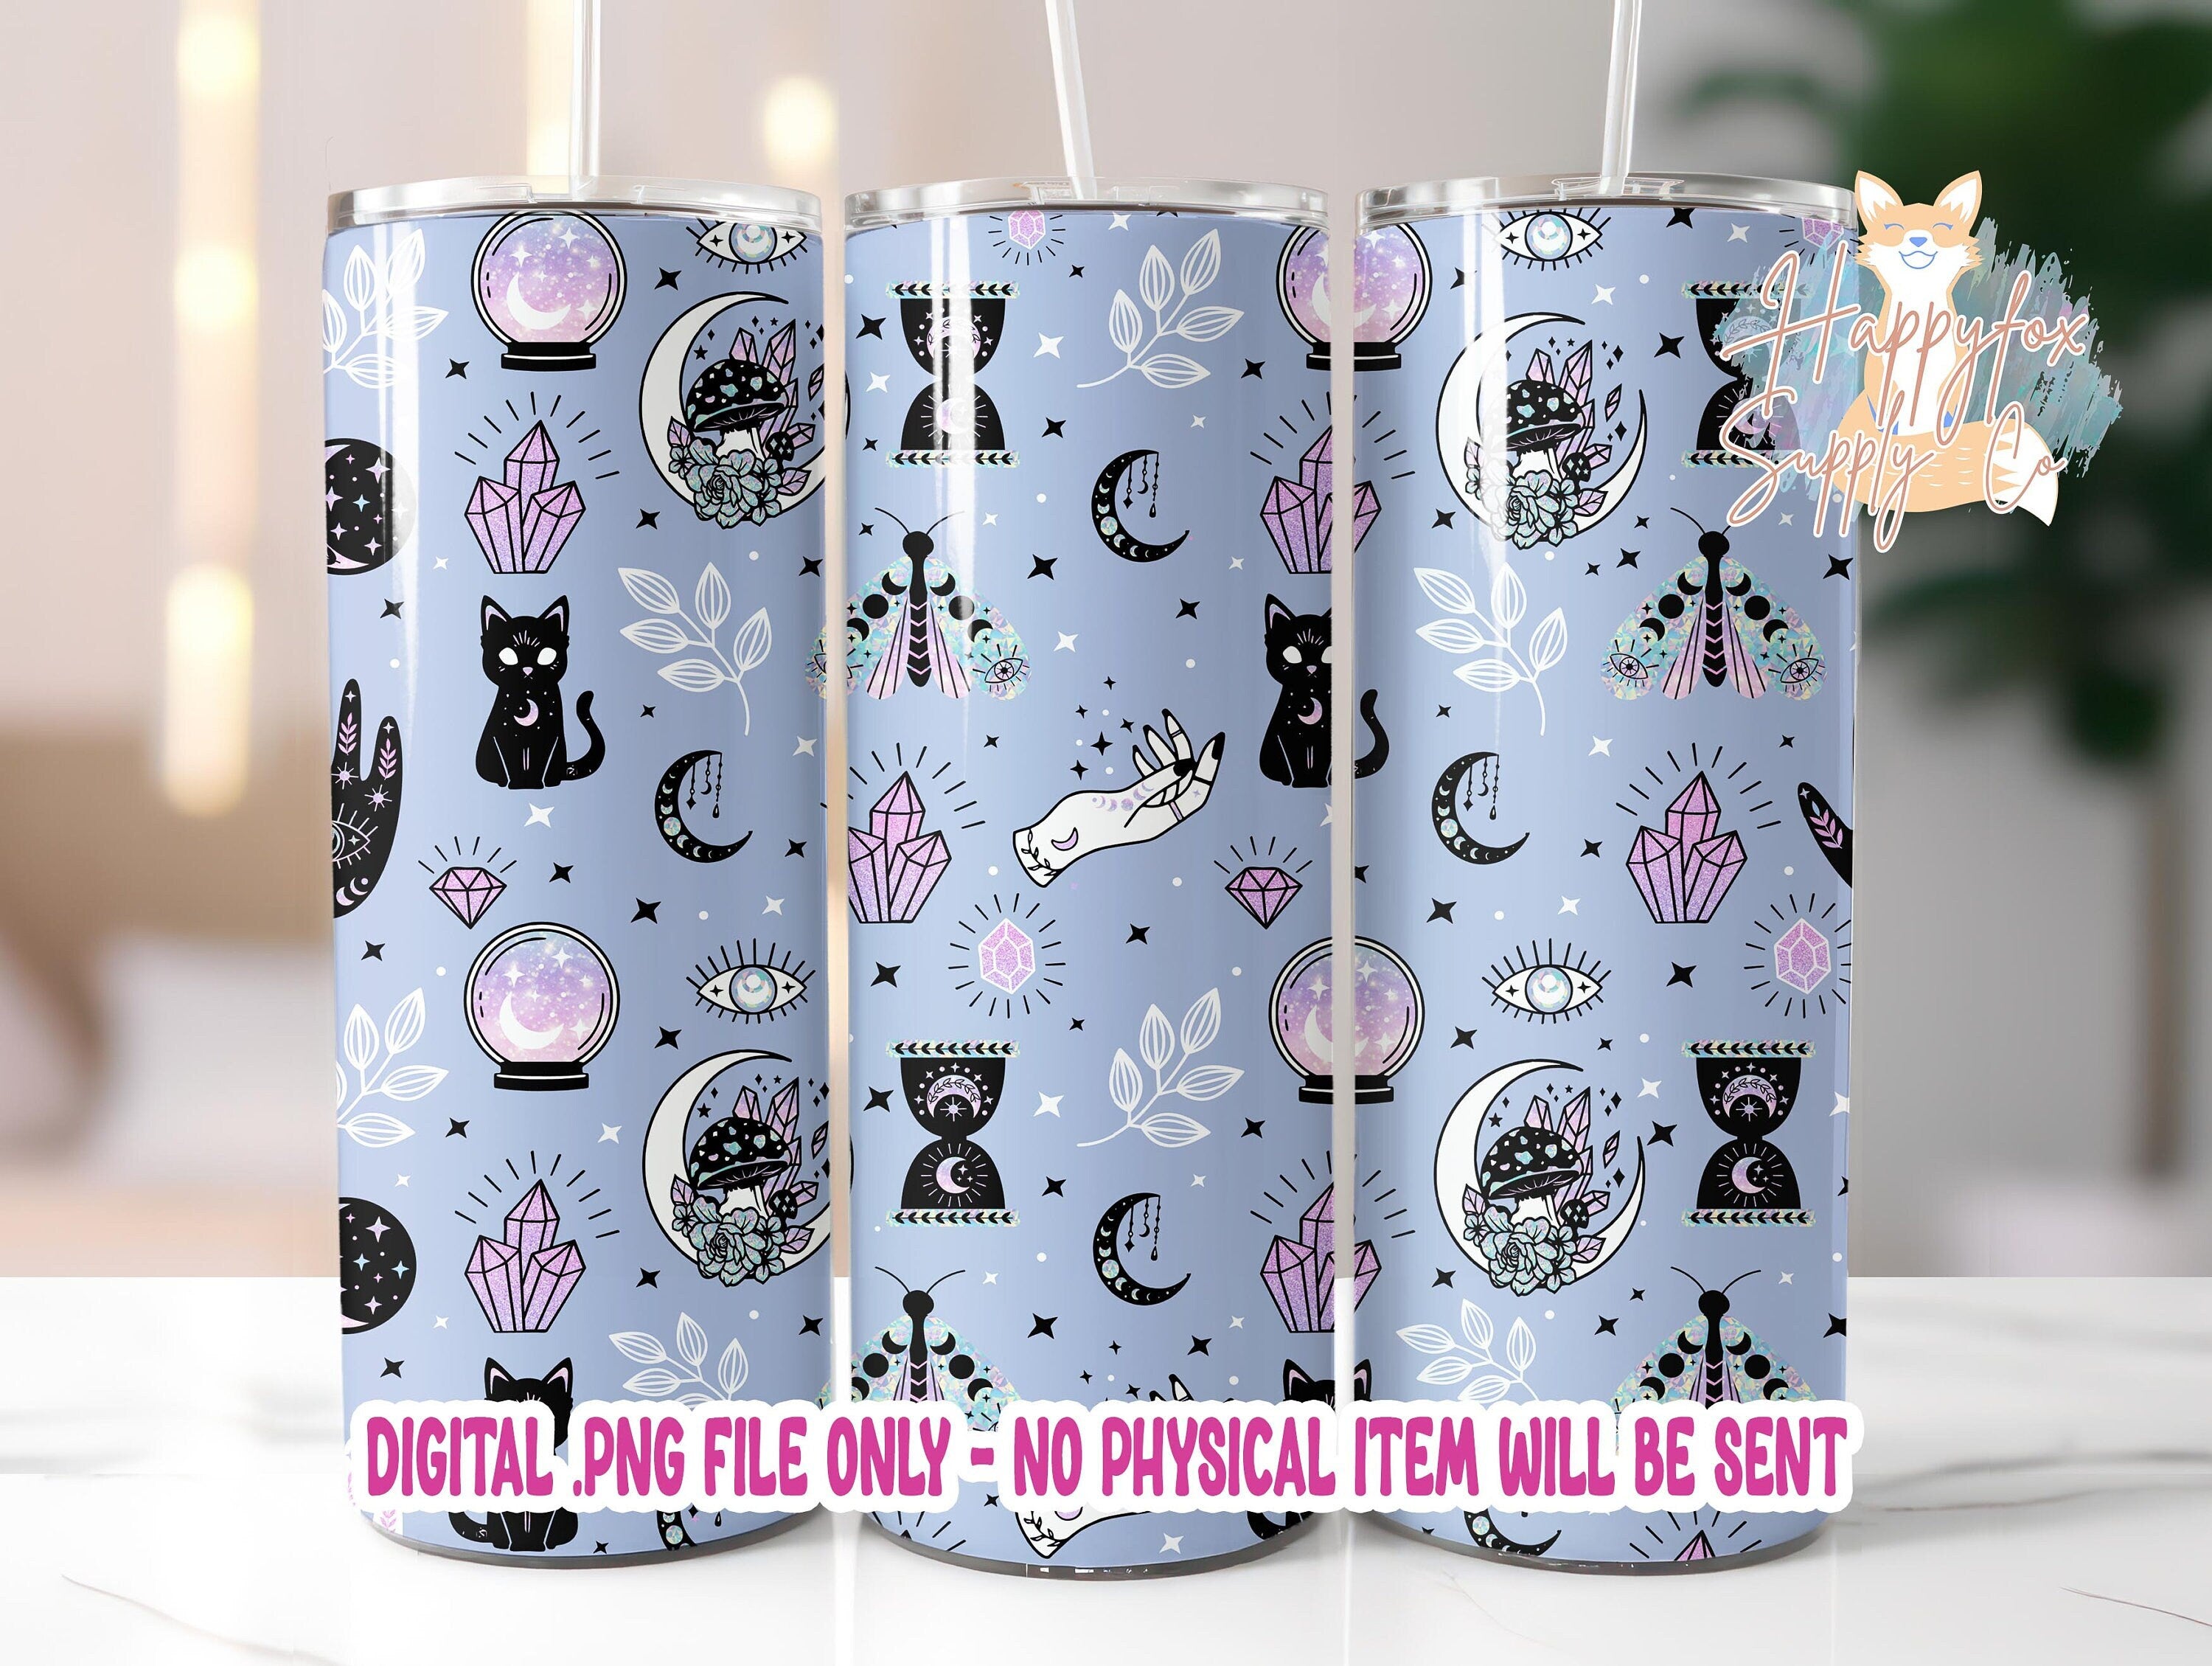 20oz Tumbler Wrap High Quality Mystic Psychic Witchy Crystals Seamless Digital Wrap For Tumblers Sublimation Wrap Moons Moths Cats Mushrooms